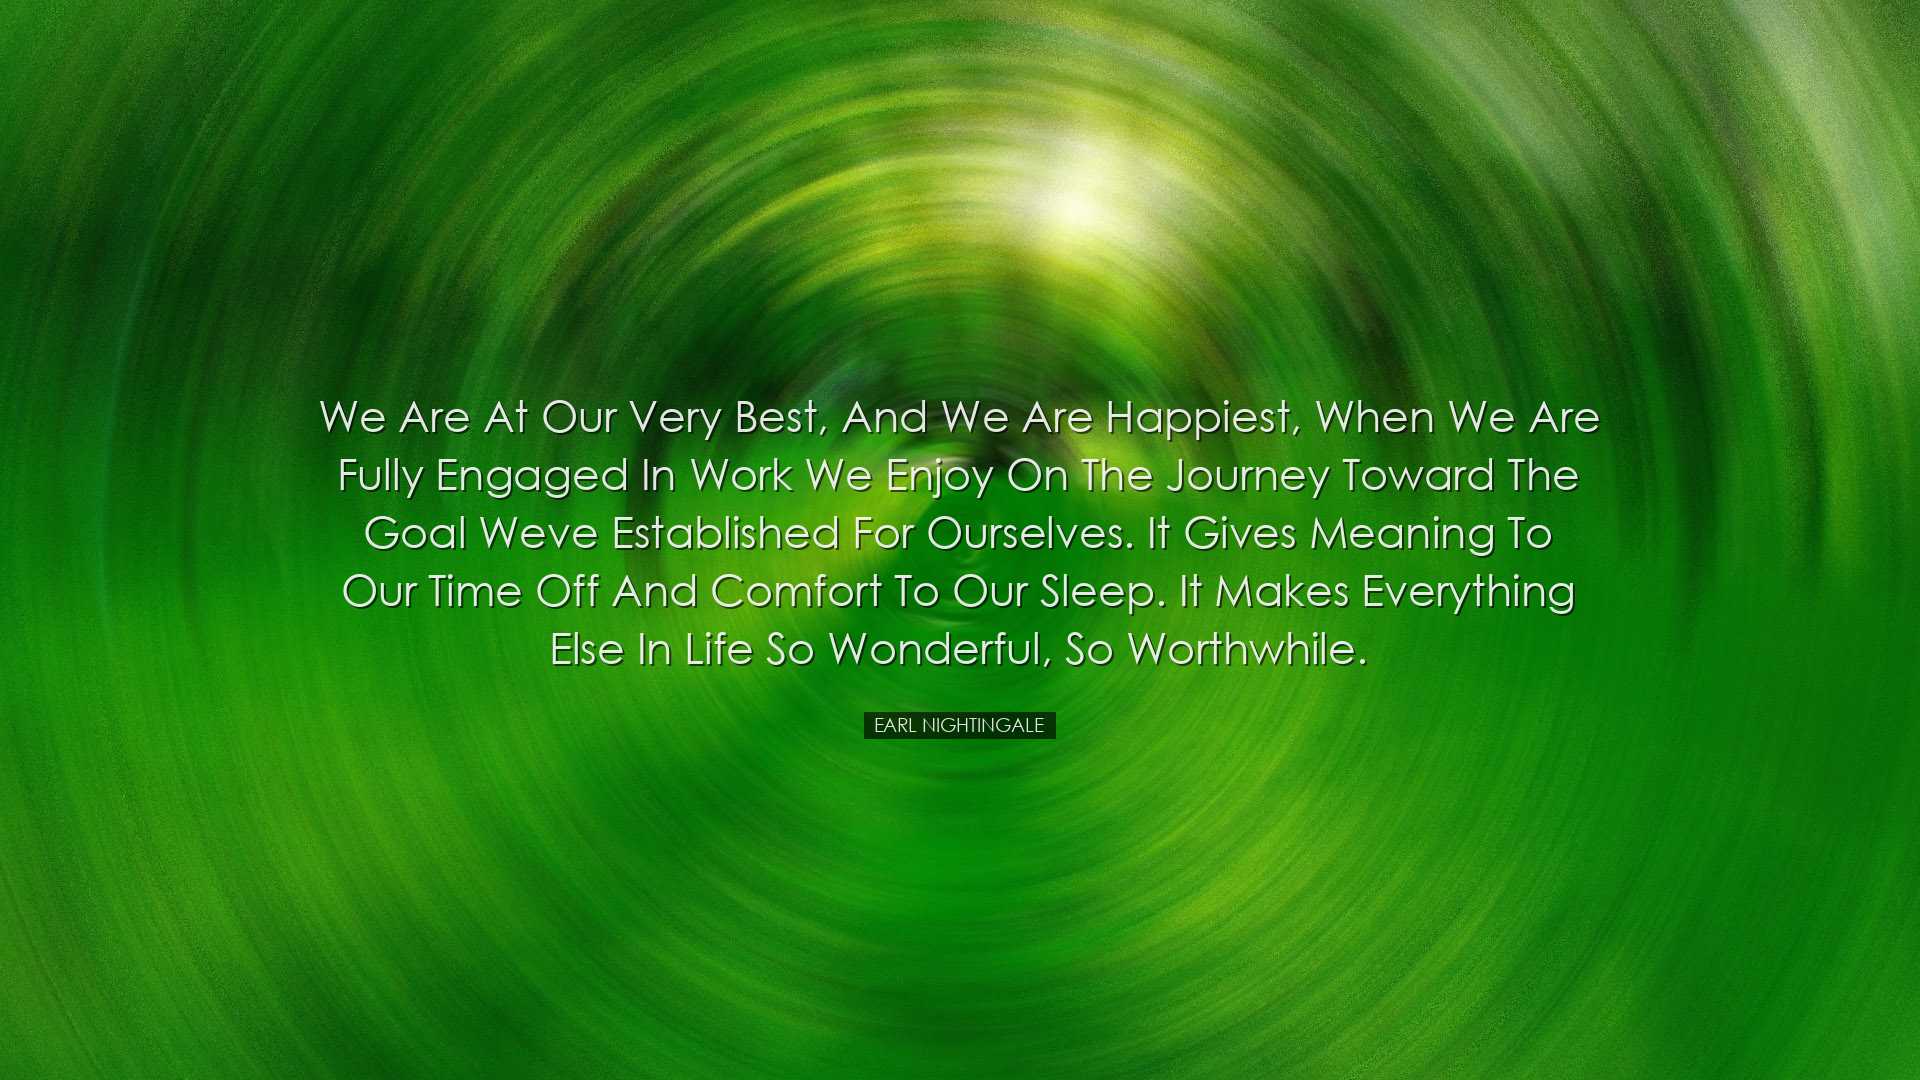 We are at our very best, and we are happiest, when we are fully en